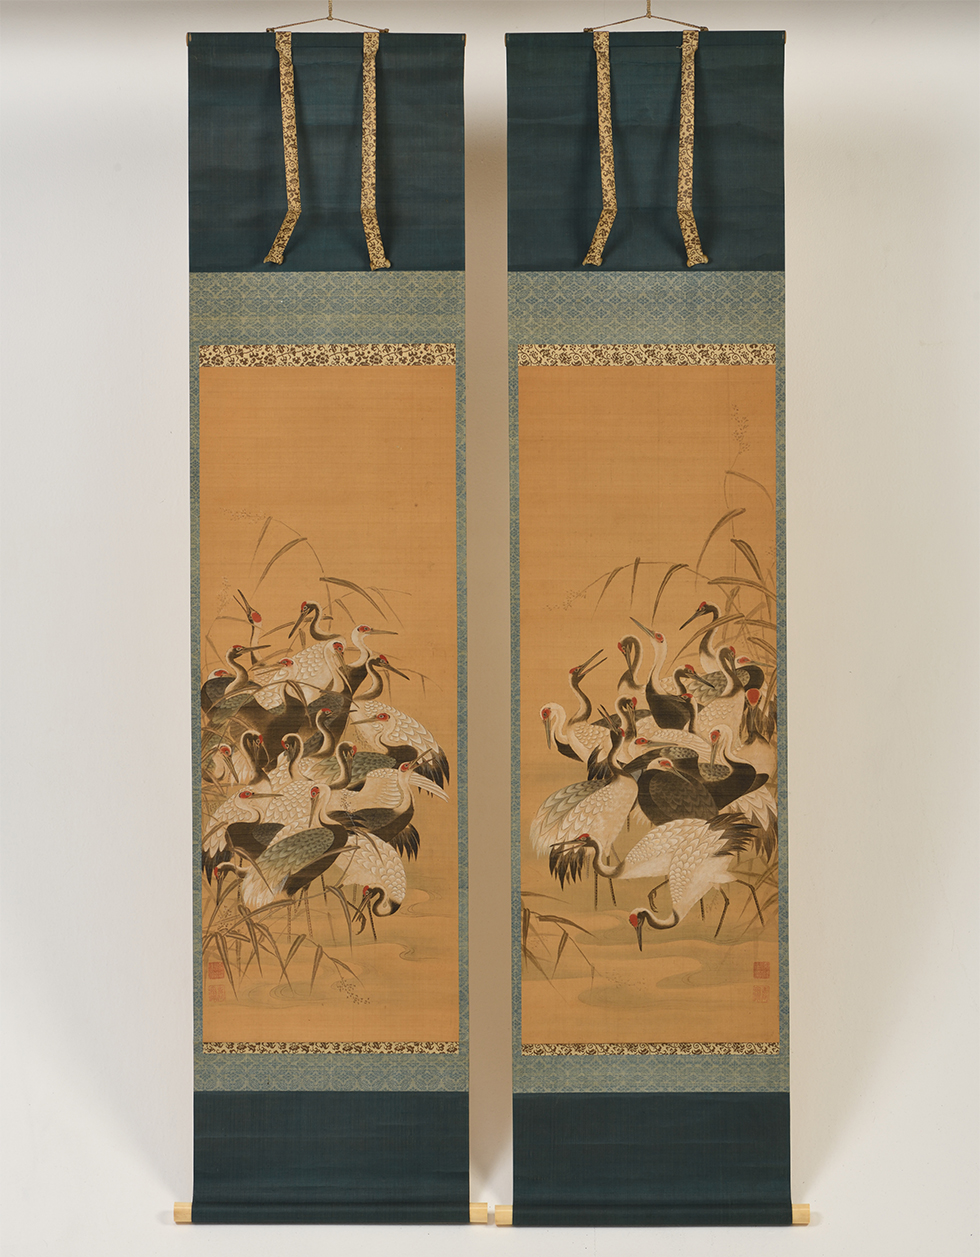 A pair of hanging scrolls “Flock of Cranes” with two seals (unidentified)